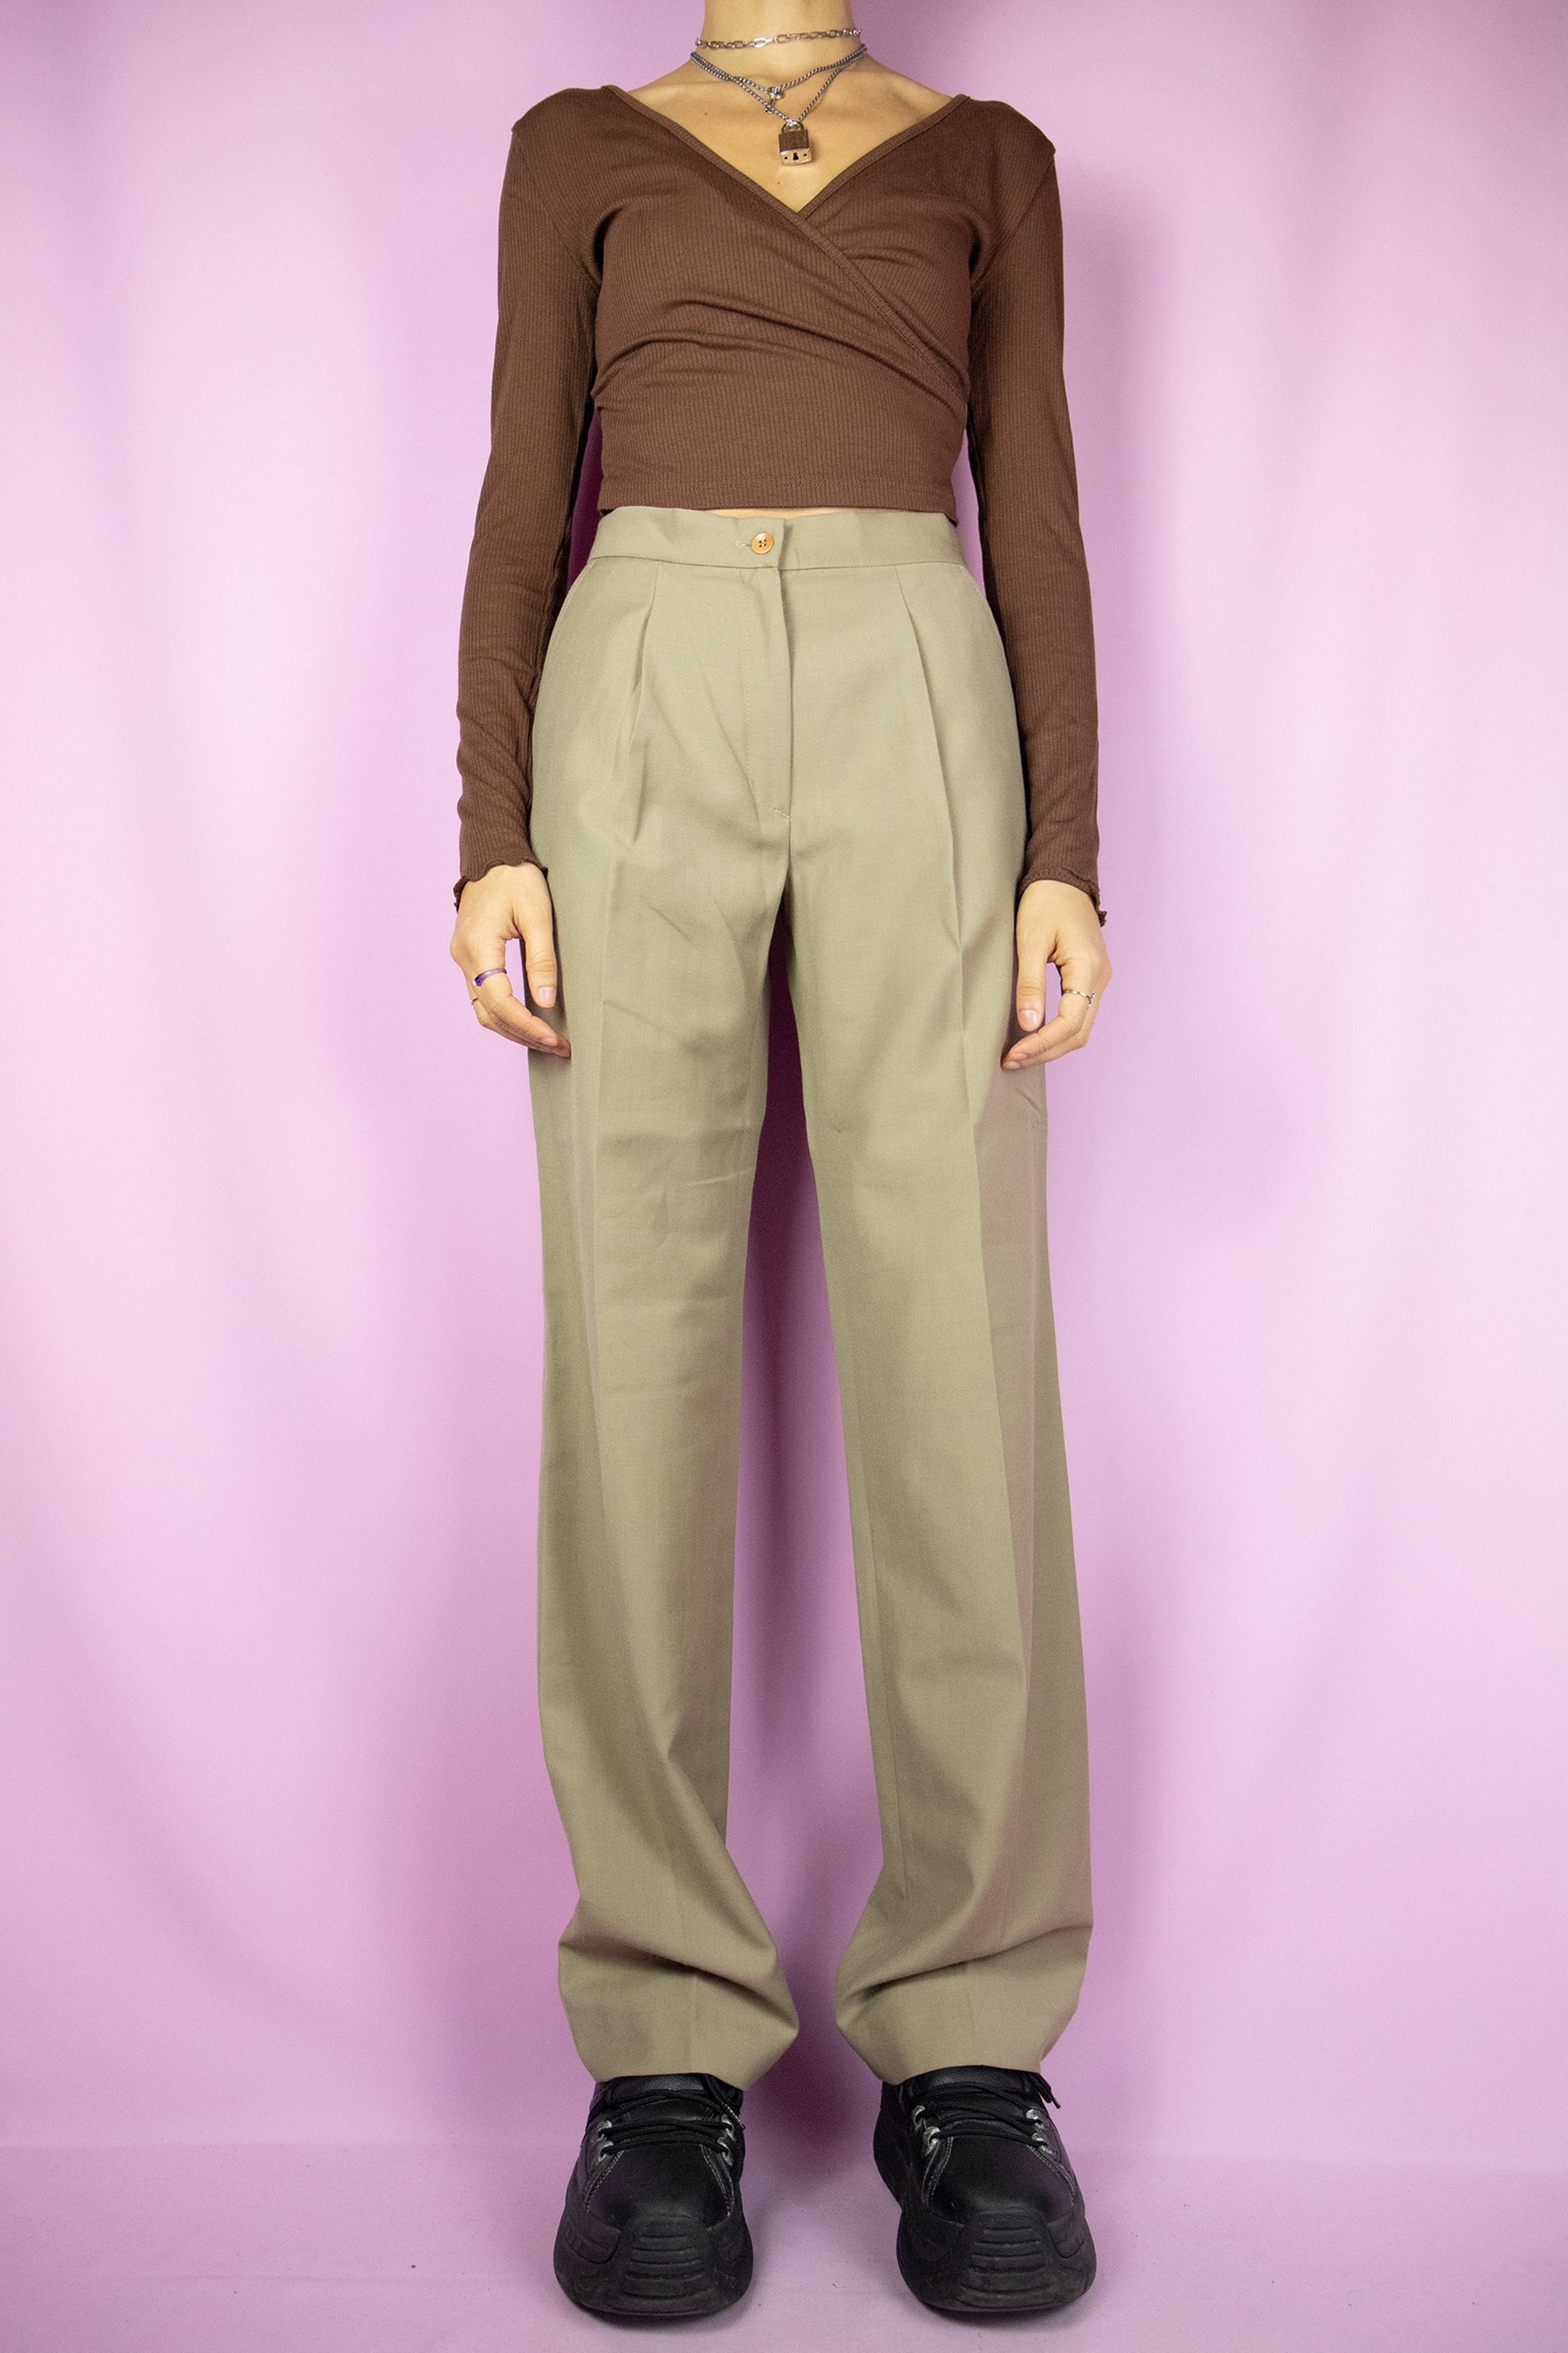 The Vintage 90s Beige Pleated Pants are beige wide pants with pleats, a zipper closure and pockets. Elegant classic tailored 1990s office pleated tapered trousers.